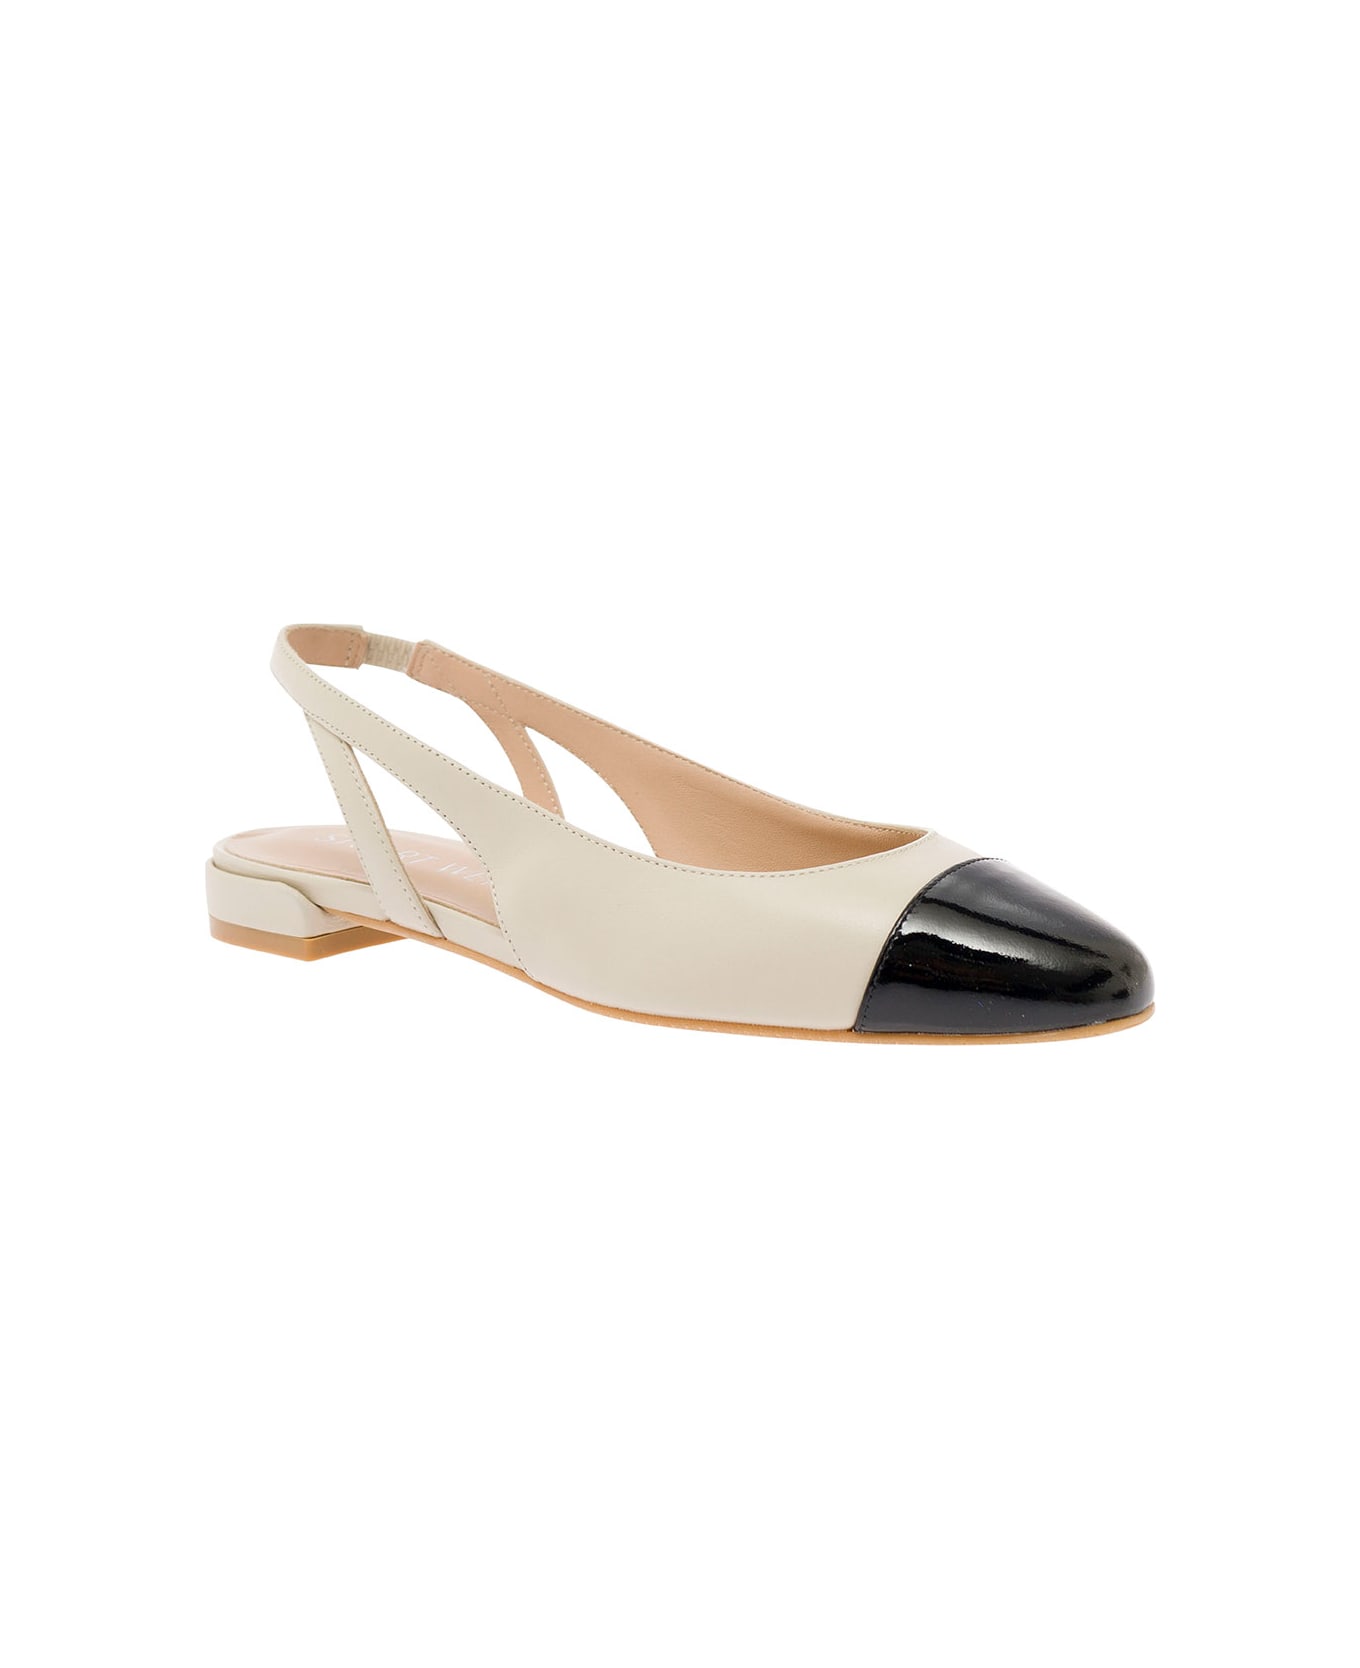 Stuart Weitzman White Slingback With Contrasting Toe In Smooth Leather Woman - White フラットシューズ